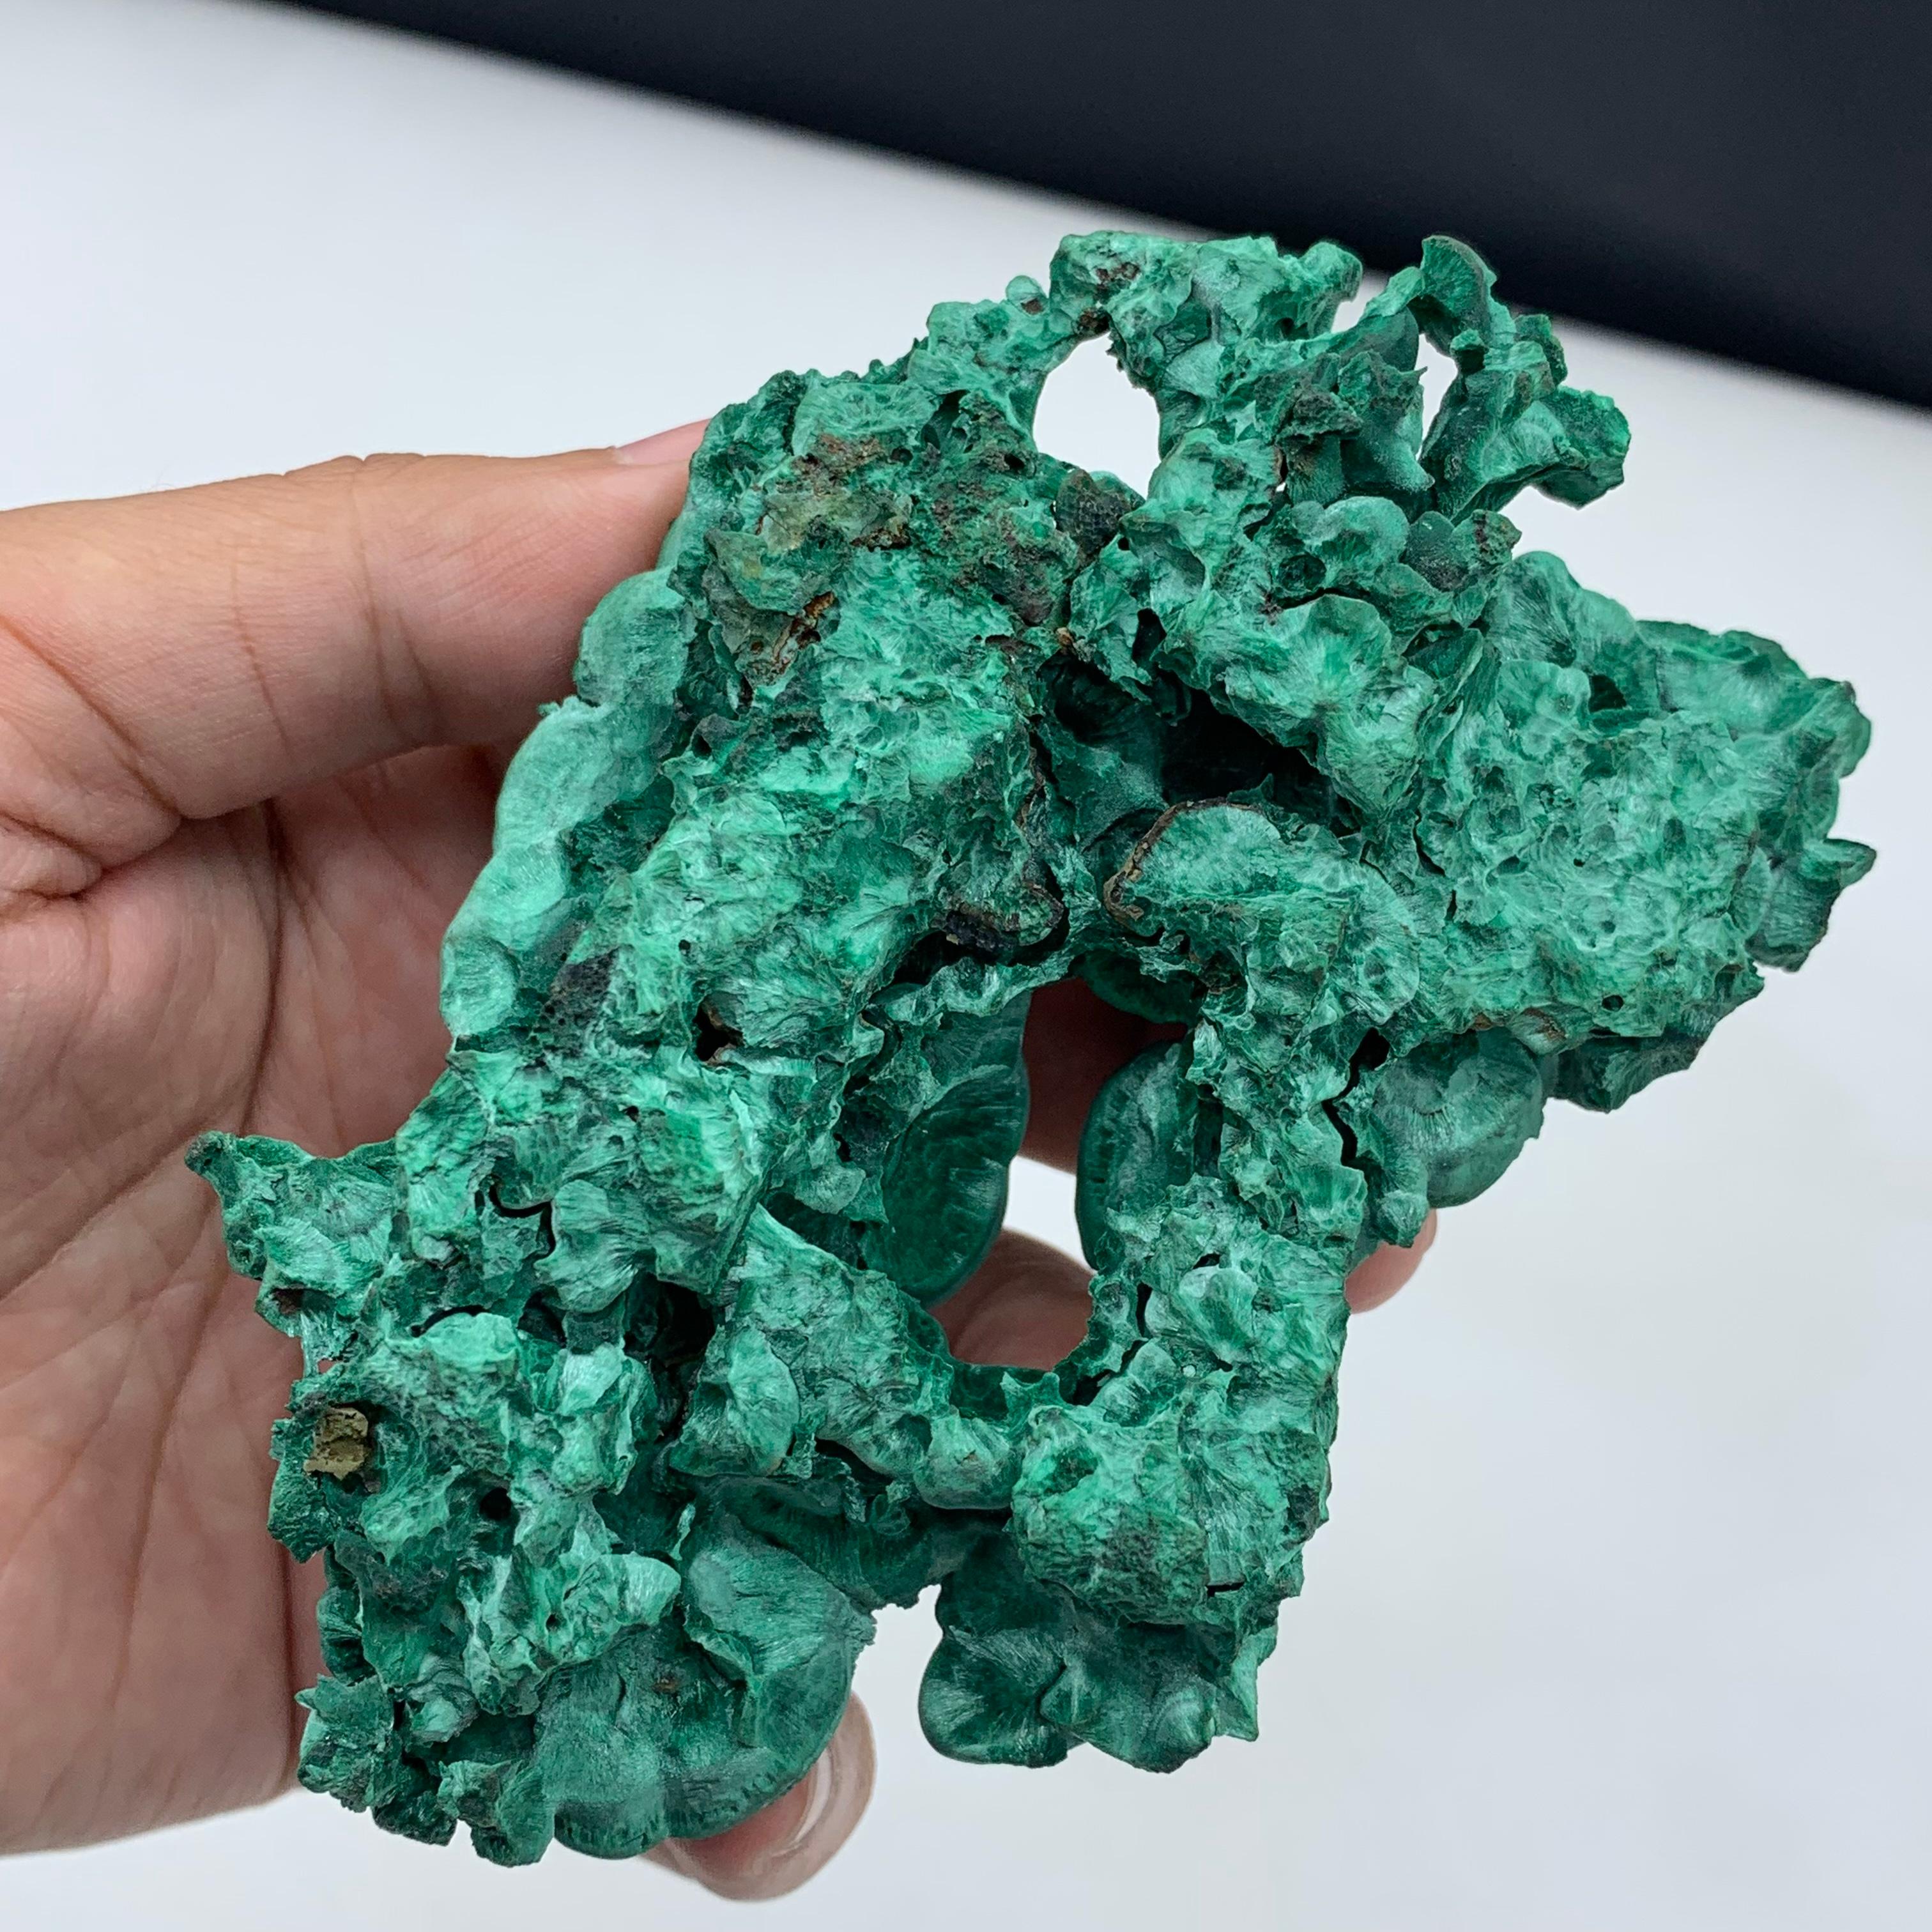 Contemporary 291 Gram Incredible Alien Eye Malachite Cluster Specimen From Guangdong, China  For Sale